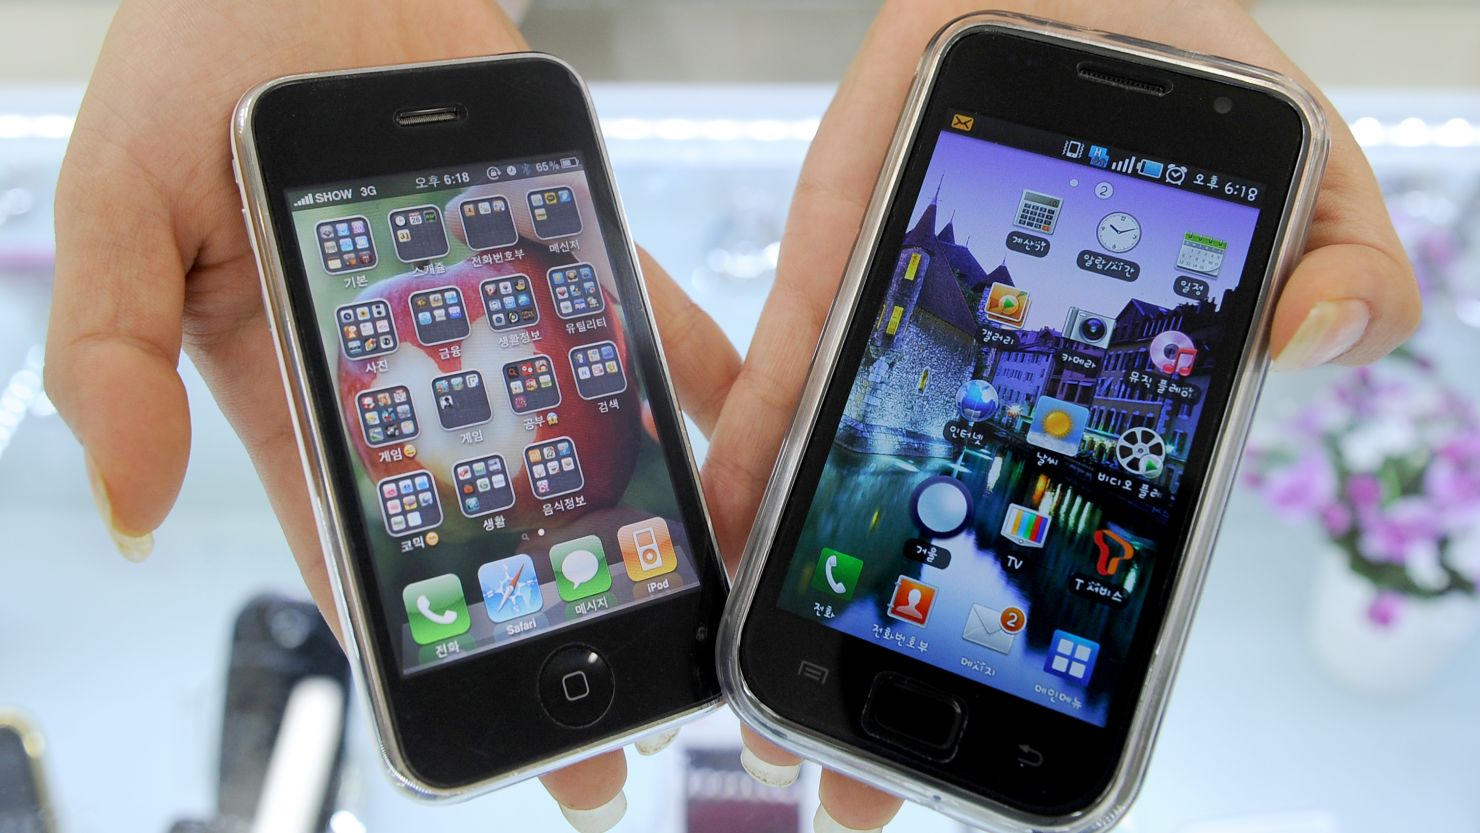 After Apple's patent infringement victory over Samsung, many are asking: "What next?"